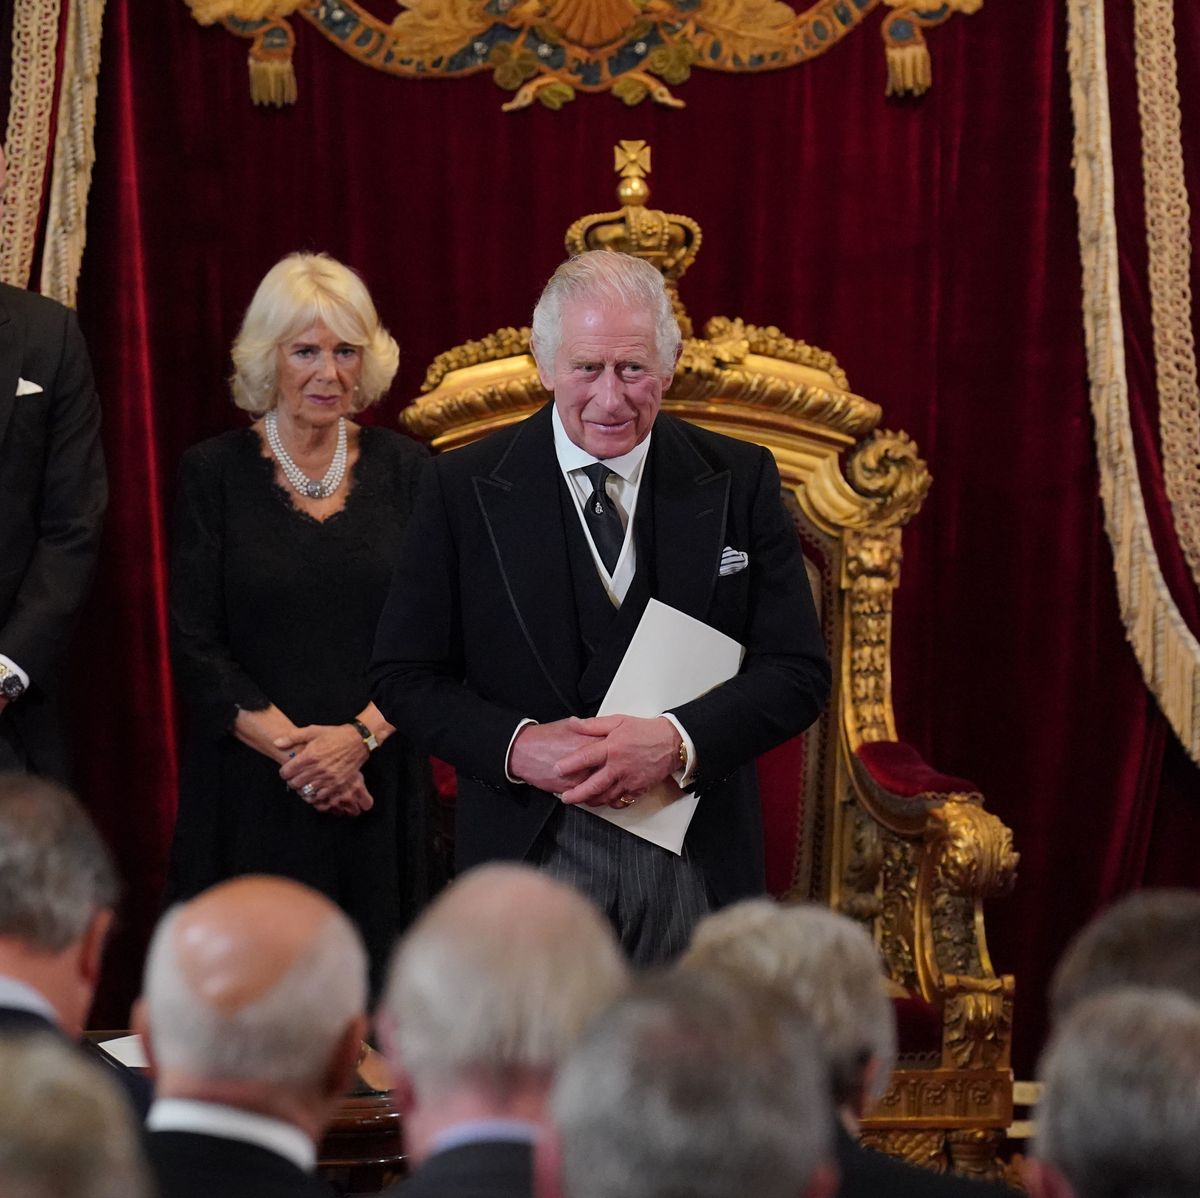 King Charles III is proclaimed king: on camera for the first time